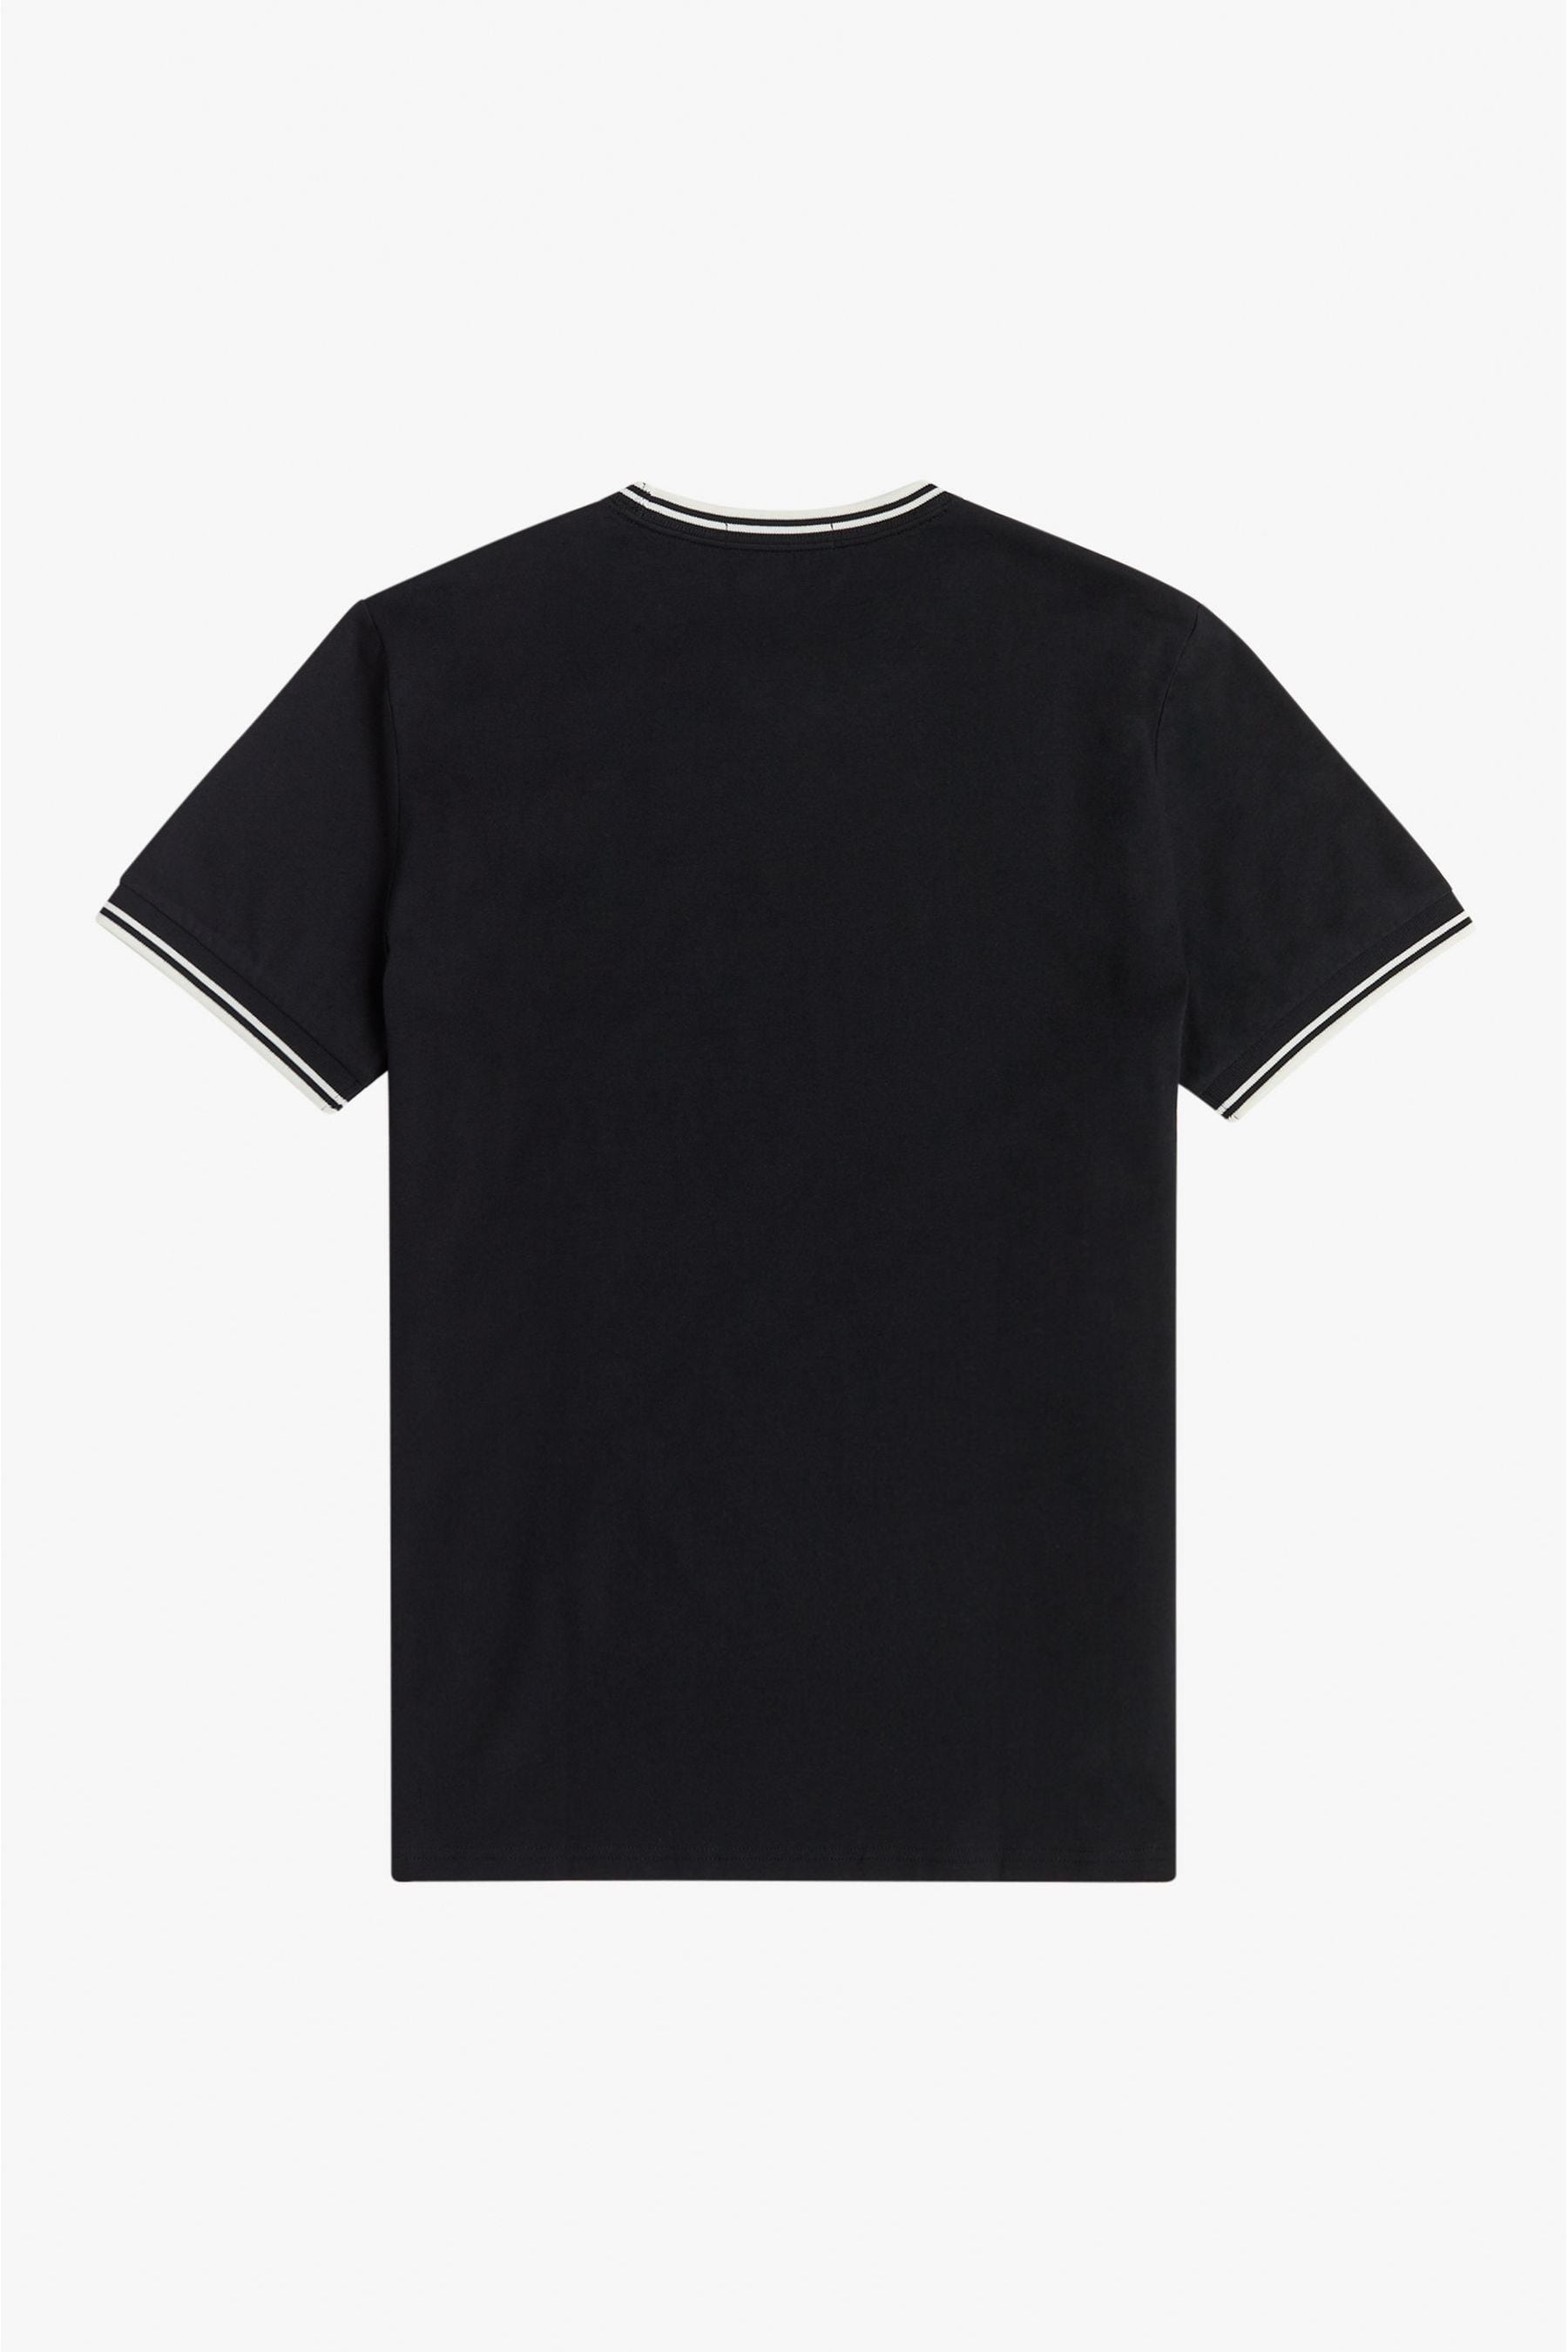 Buy Fred Perry Twin Tipped Logo T-Shirt from the Next UK online shop